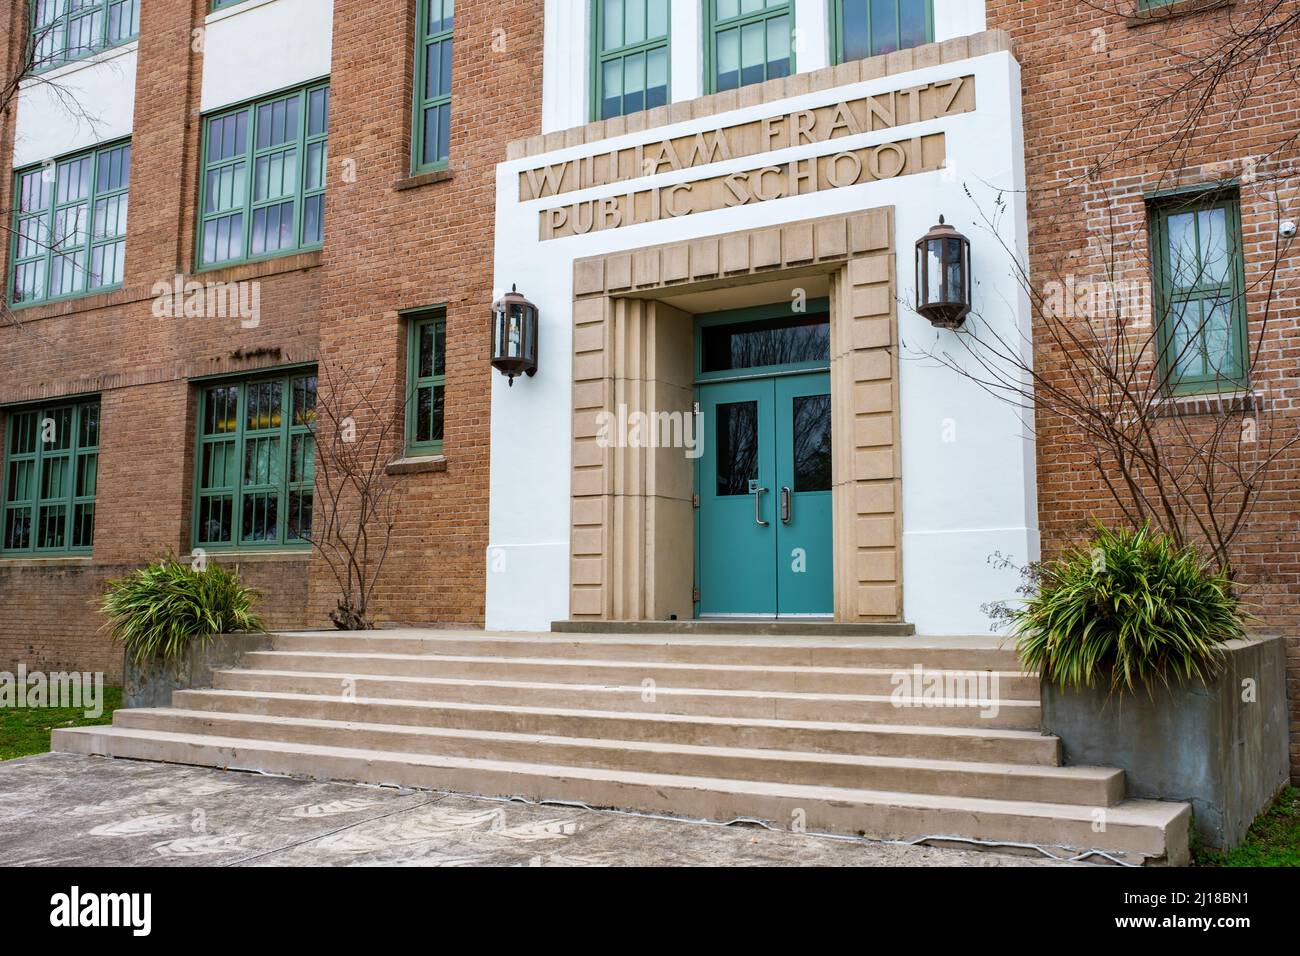 NEW ORLEANS, LA, USA - MARCH 16, 2022: Entrance to the Historic William T. Frantz Elementary School, which was at the forefront of desegregation Stock Photo